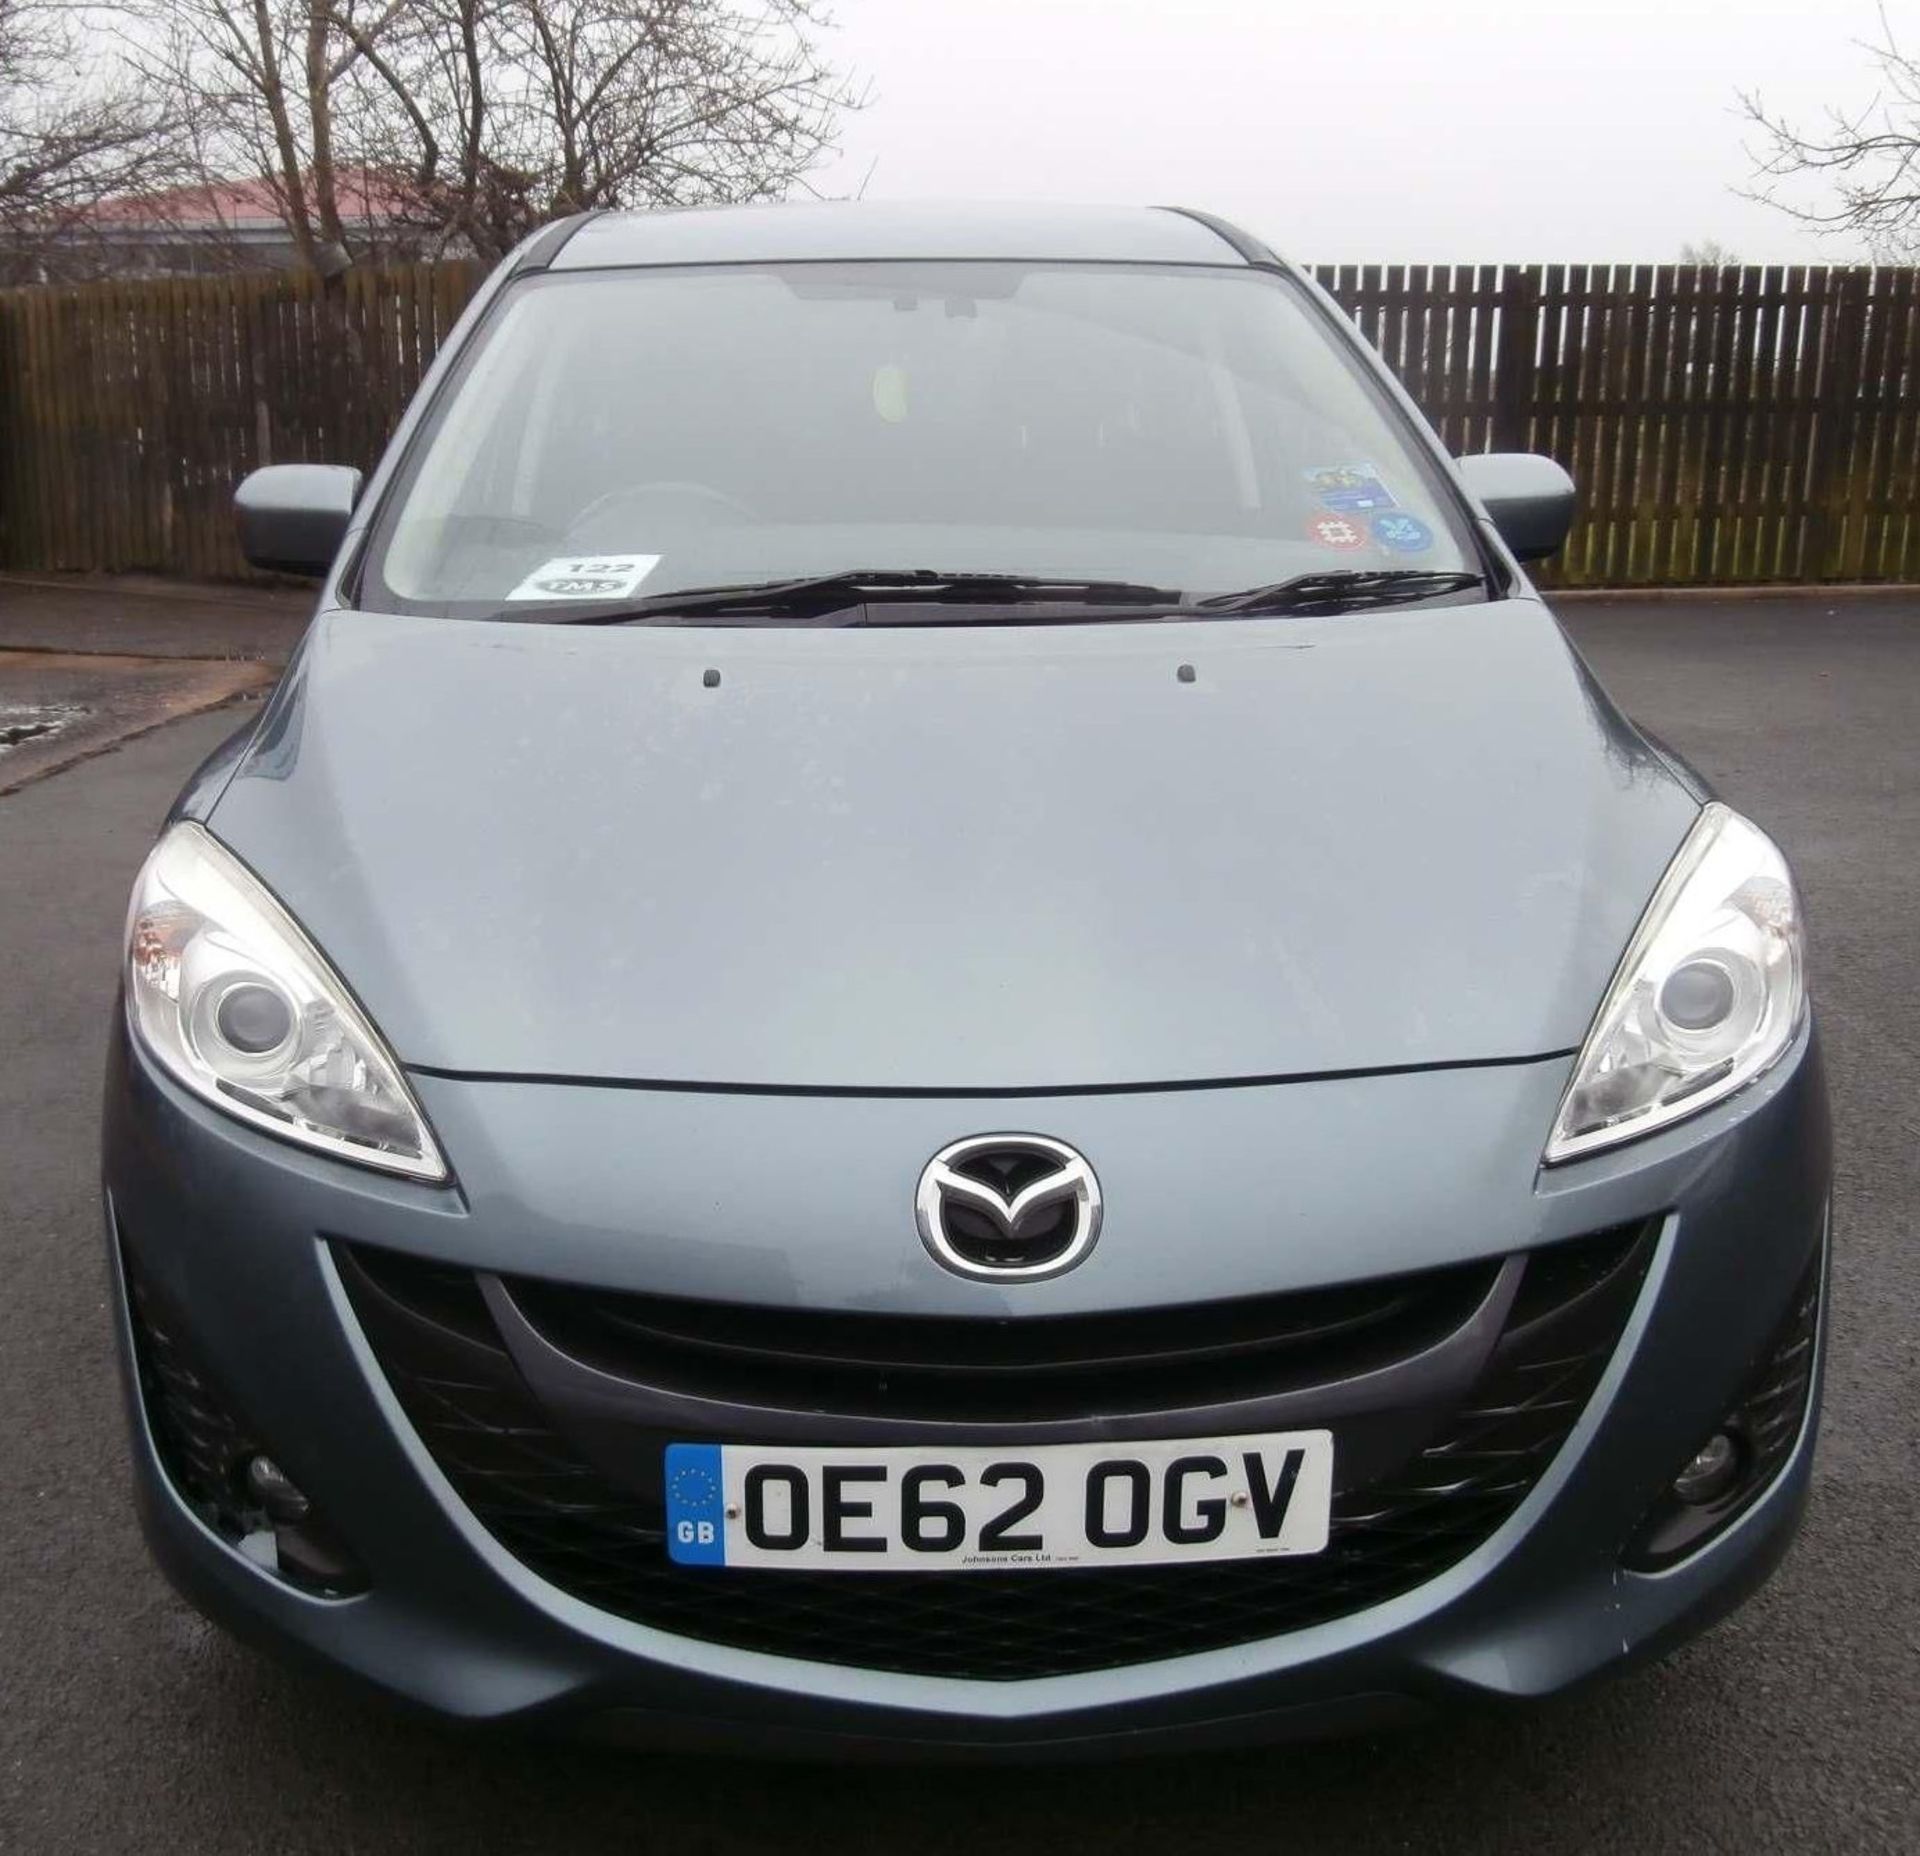 2013 Mazda 5 2.0 Venture Edition 5 Dr MPV - CL505 - NO VAT ON THE HAMMER - Location: Corby, N - Image 3 of 18